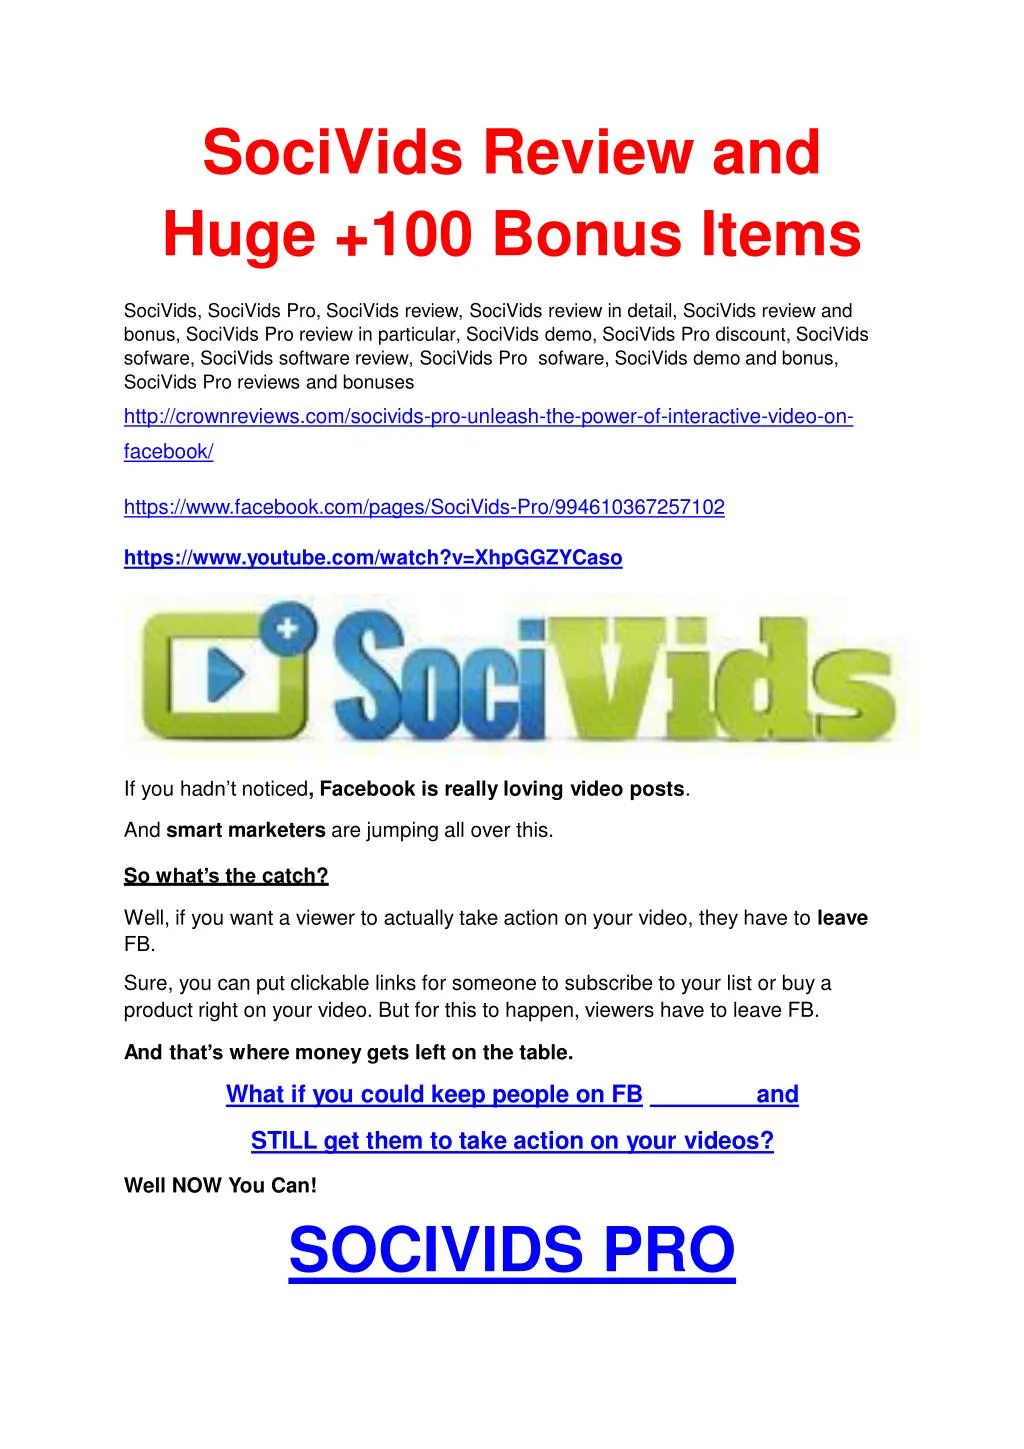 socivids review and huge 100 bon u s ite m s